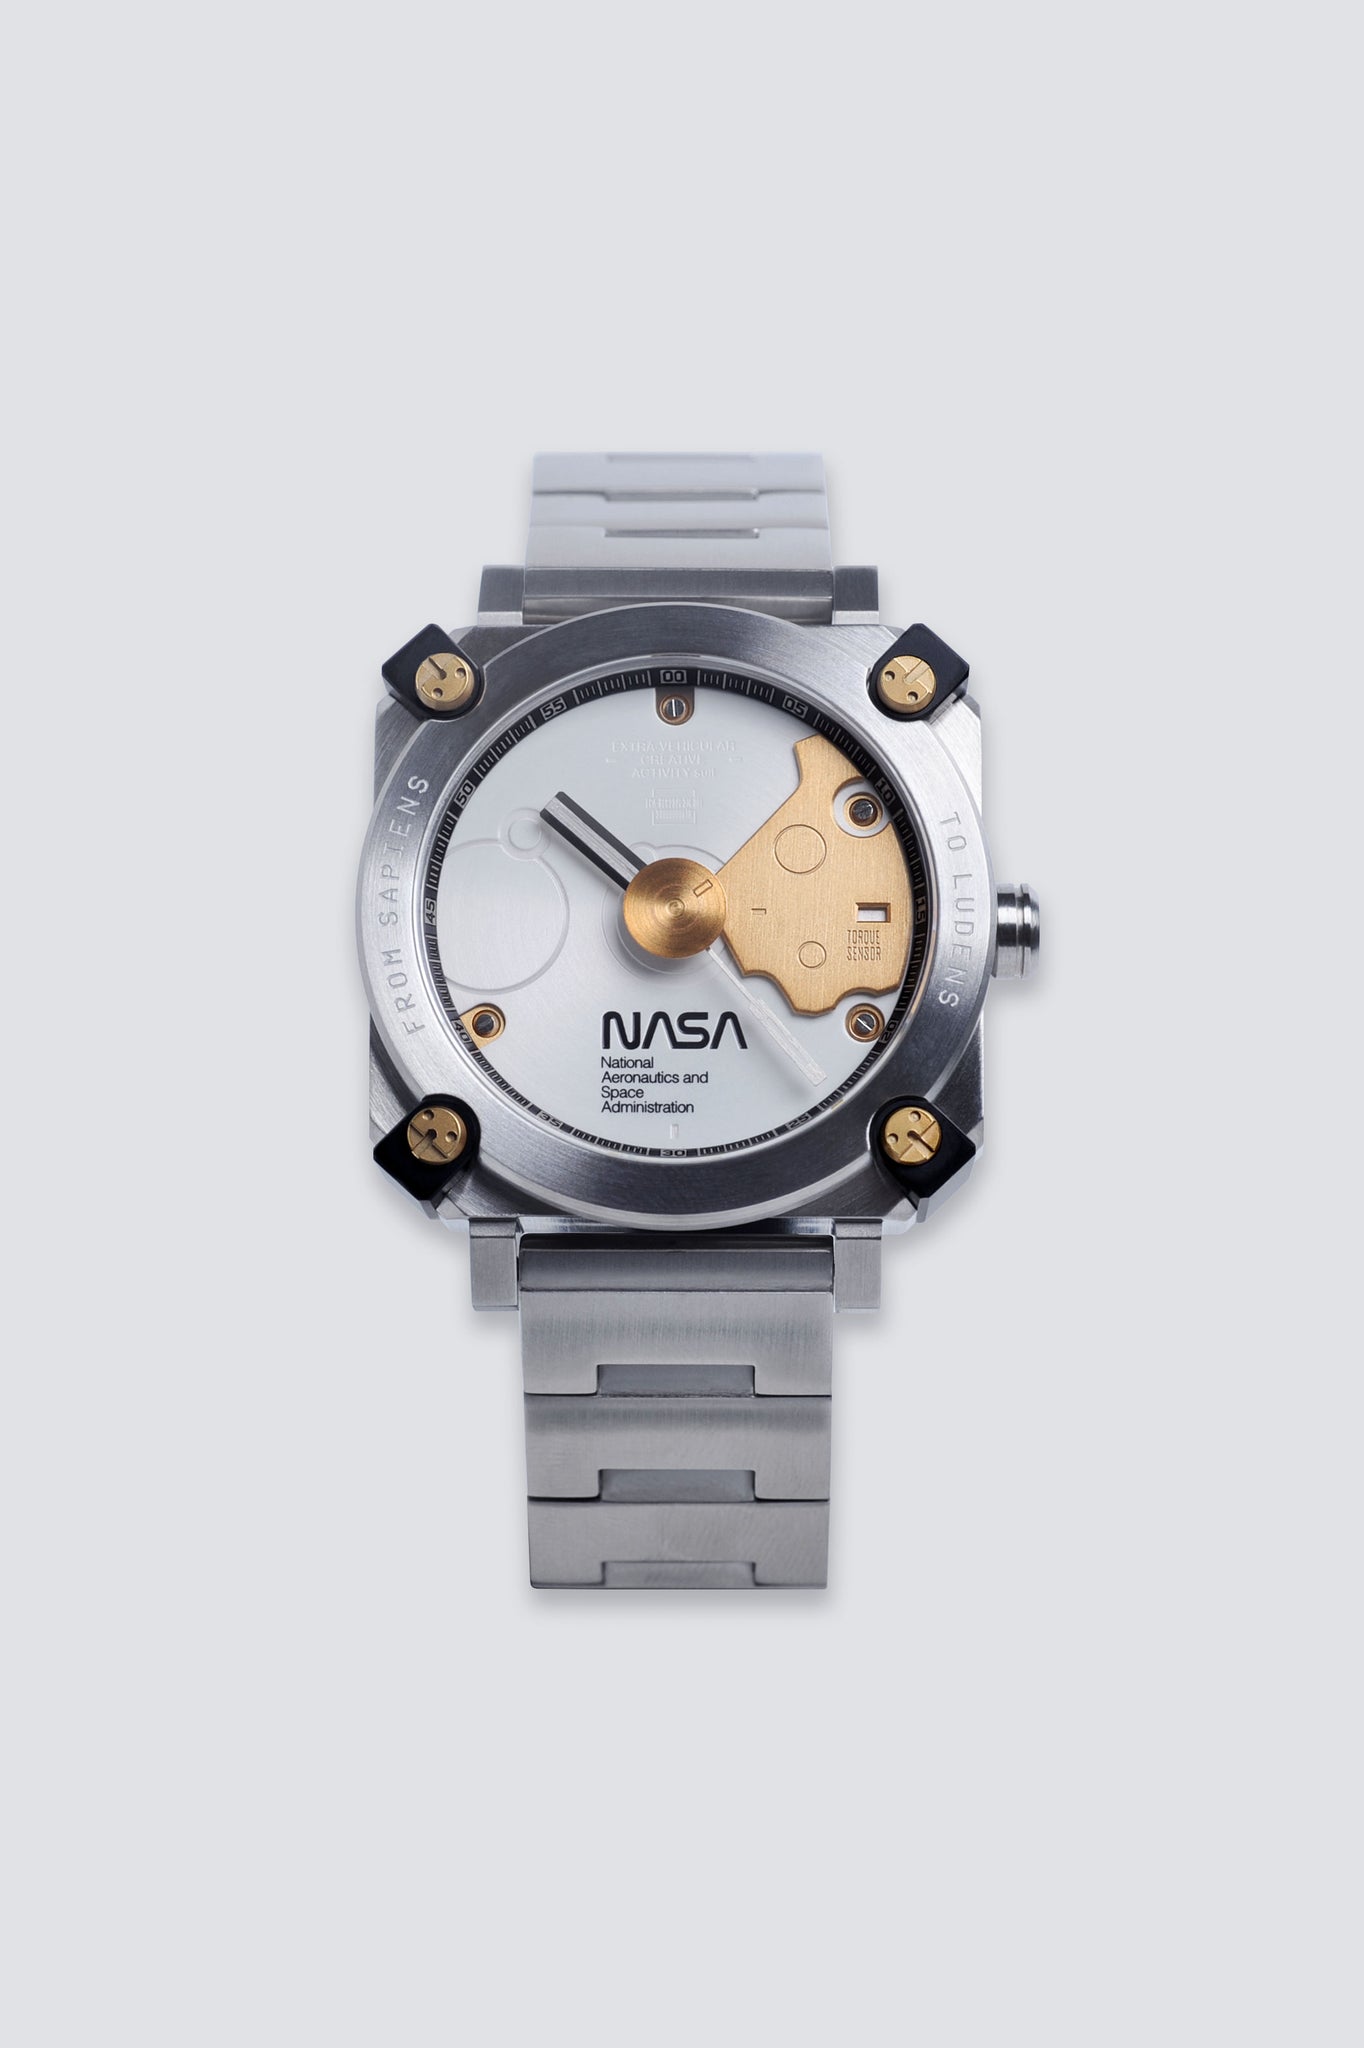 SPACE LUDENS is a “EVA Creative Suit on the wrist”. It reflects the ethos of Ludens who connects the elements of Play, Time and Space. The timepiece is designed by ANICORN, supervised by world-famous character designer Yoji Shinkawa (KOJIMA PRODUCTIONS) and officially approved by NASA.